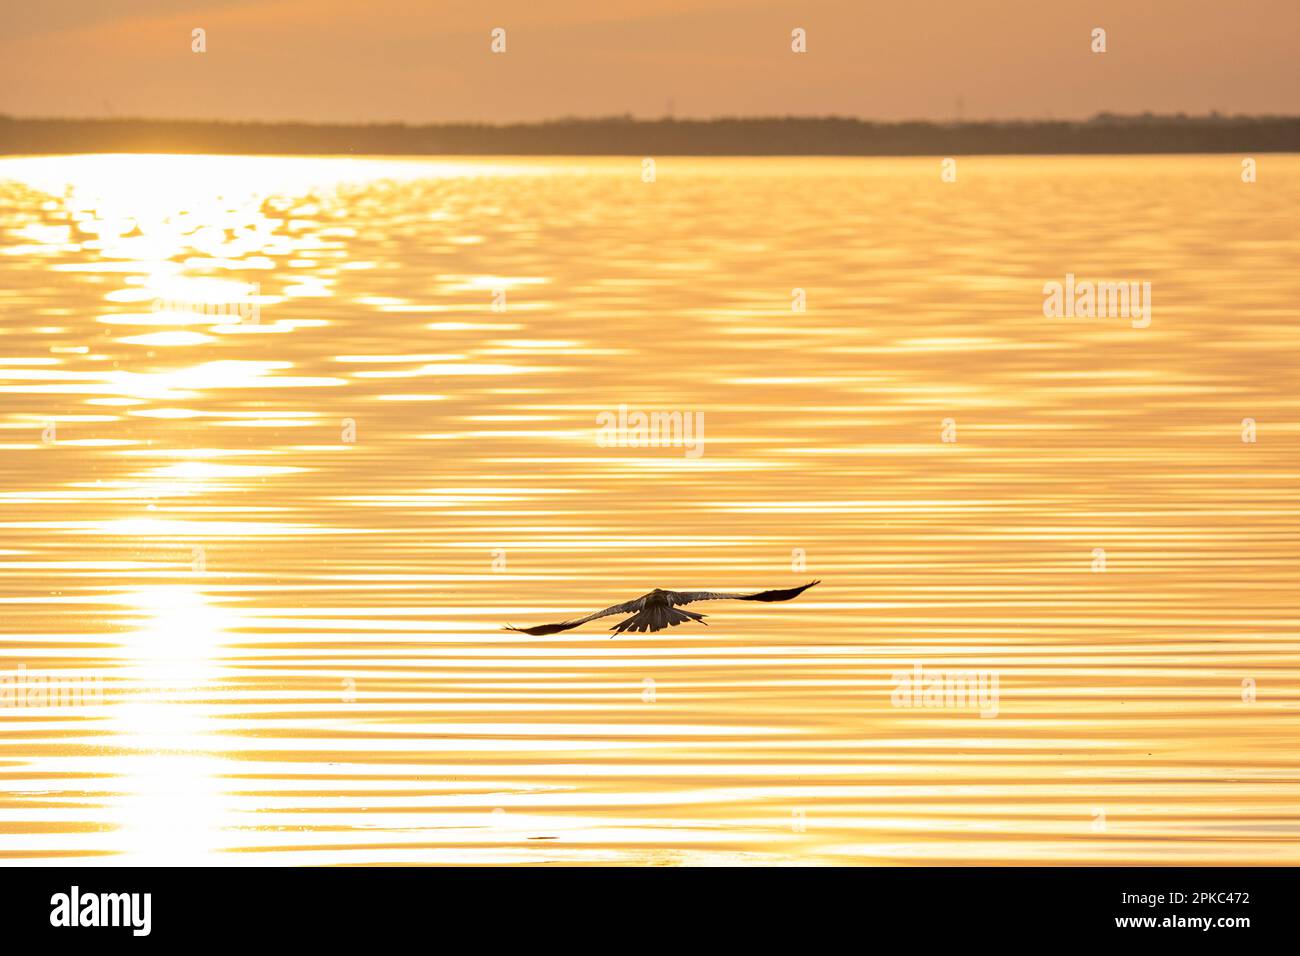 A black bird silhouette is flying low over the rippled water of the lake toward the sunset. The water reflects the golden sunlight. Stock Photo